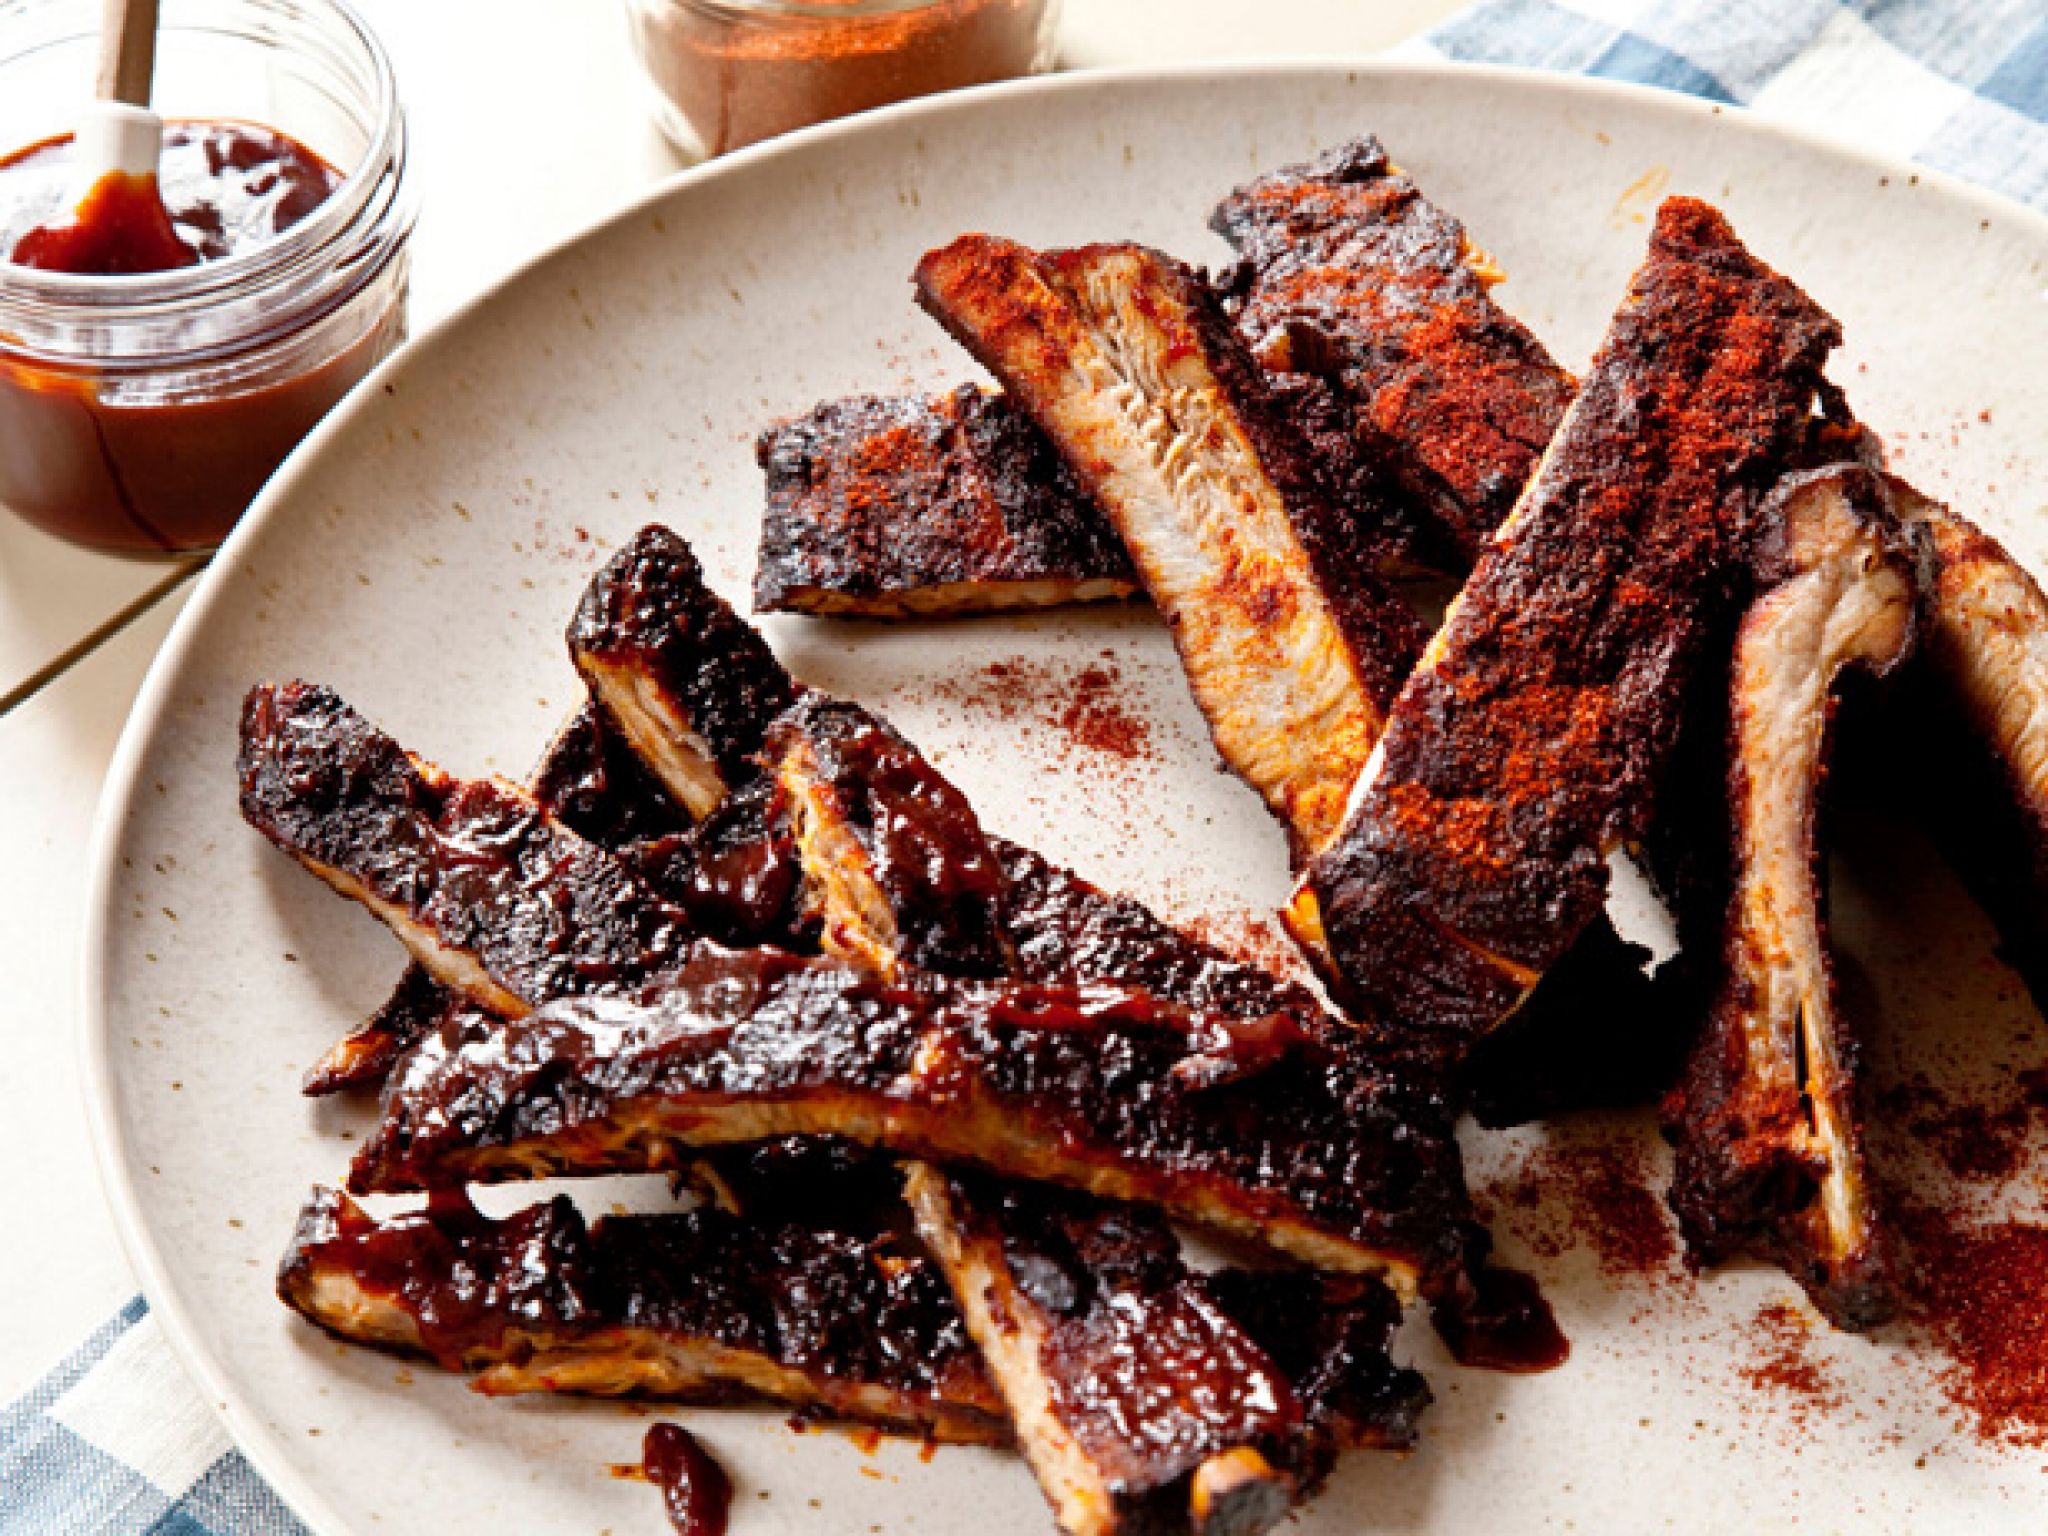 Bobby Flay’s Grilled BBQ Ribs with Root Beer BBQ Sauce